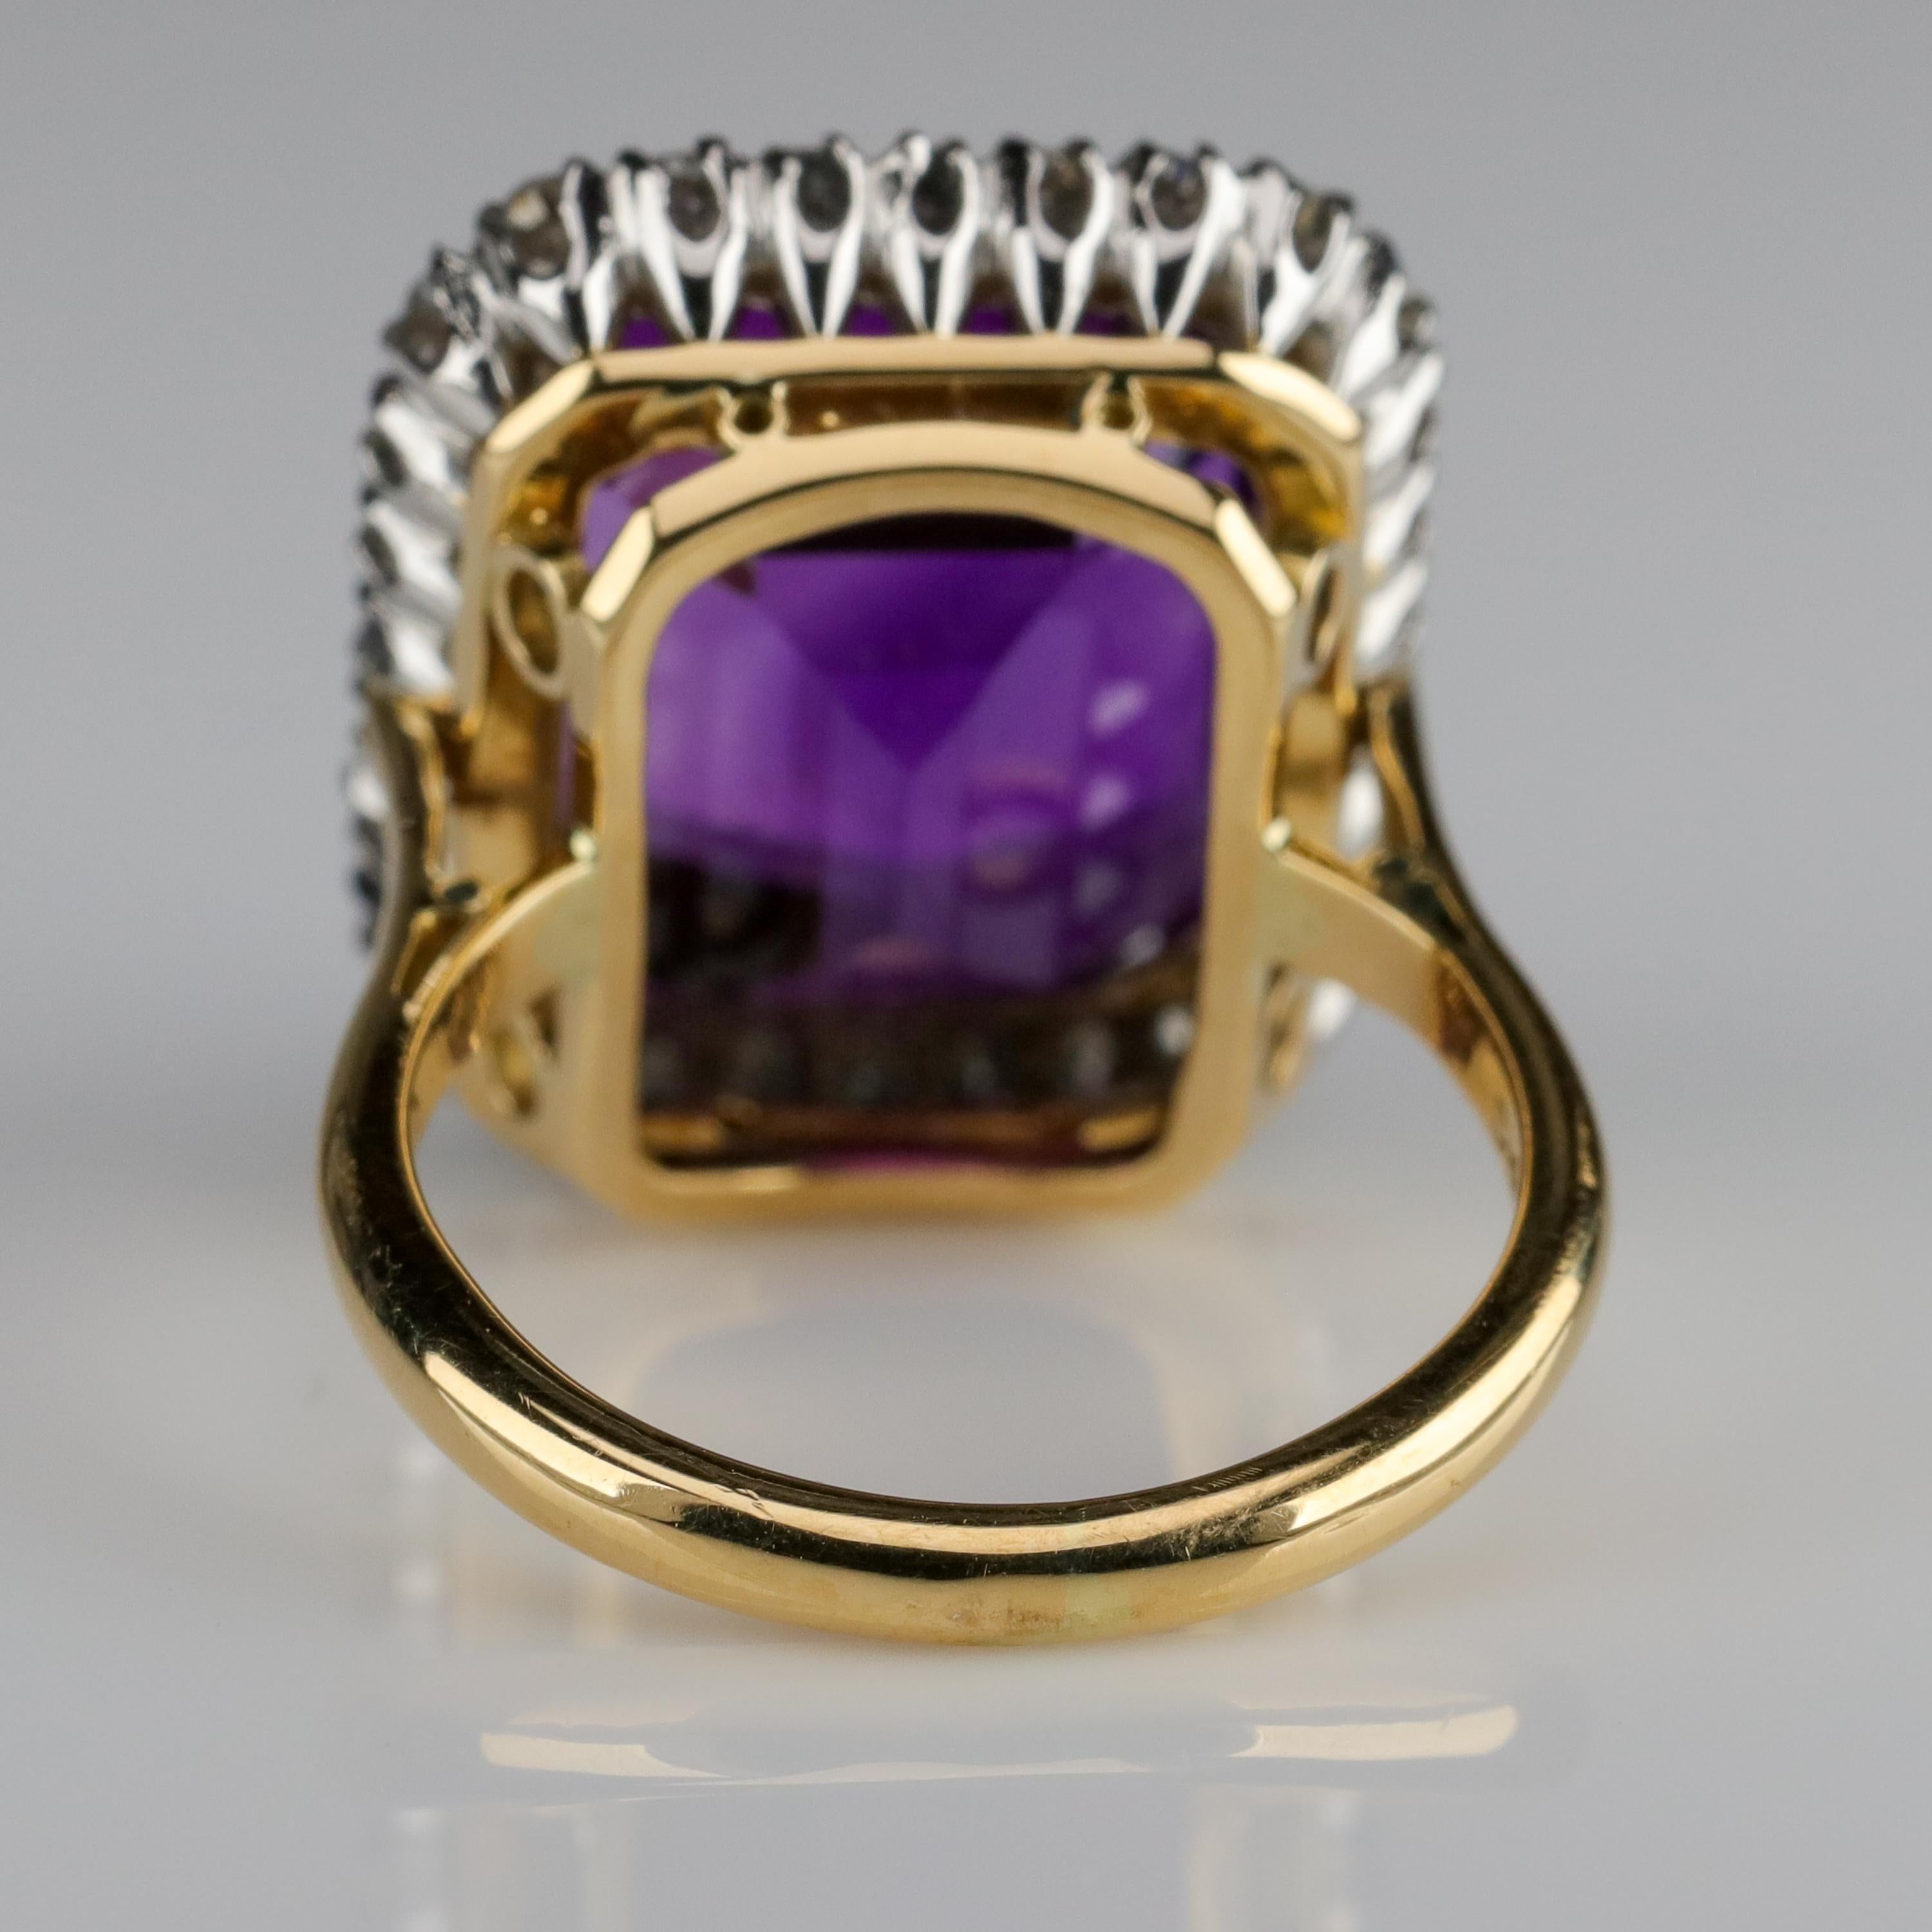 Modern Amethyst Ring by British Royal Jeweler in Original Box with Receipt